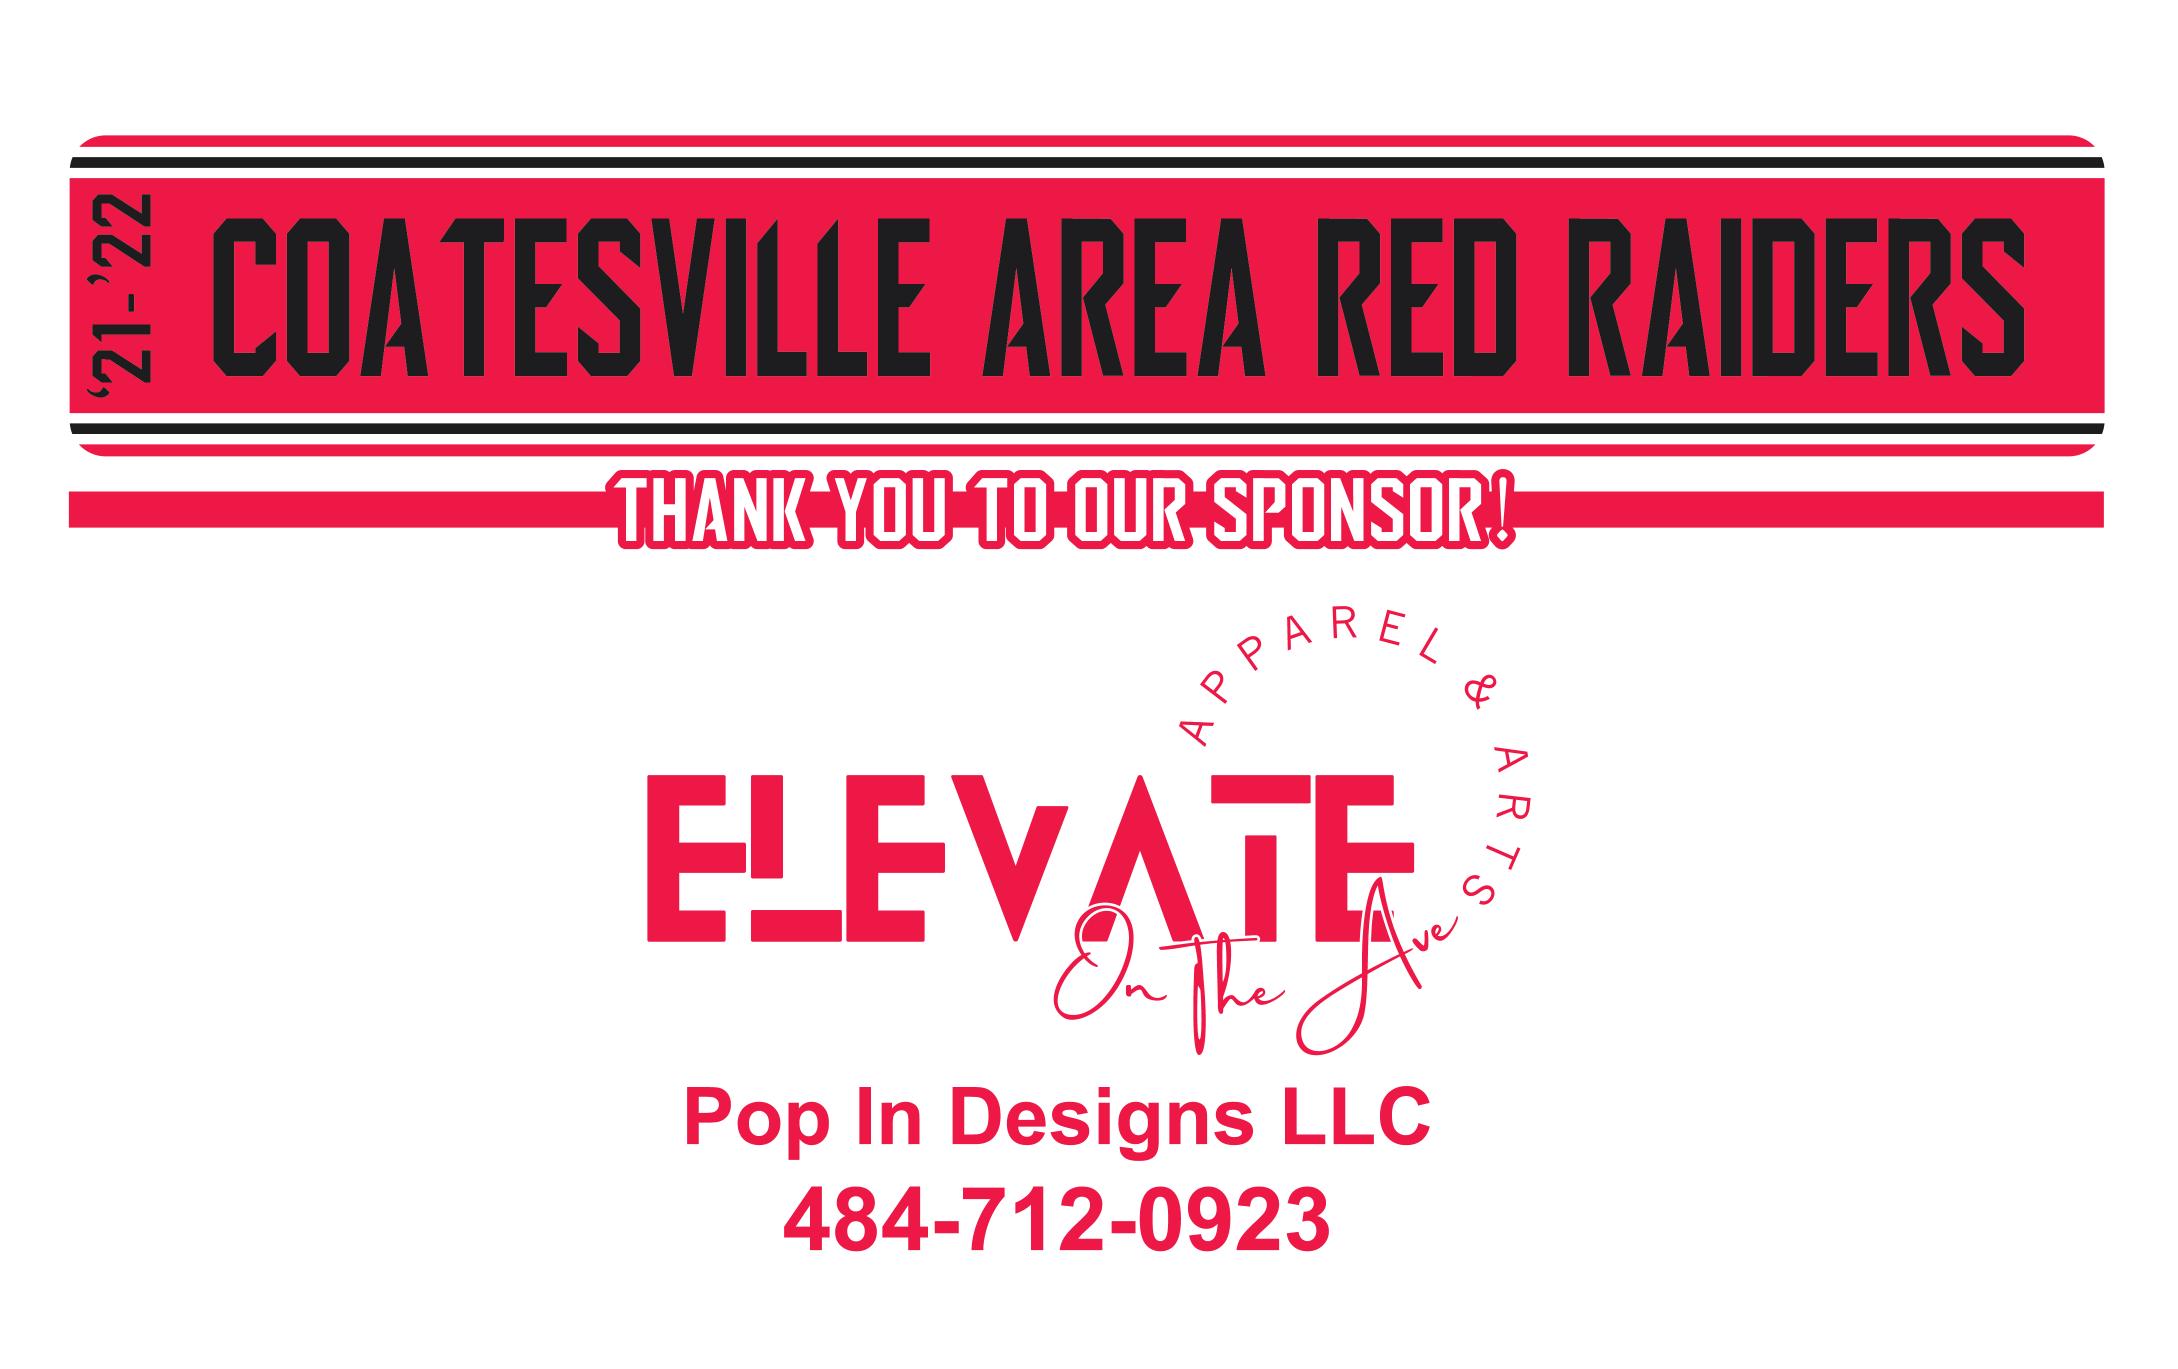 Elevate: On The Ave. - Pop In Designs, LLC - Proud Sponsor of Coatesville Area High School Red Raiders